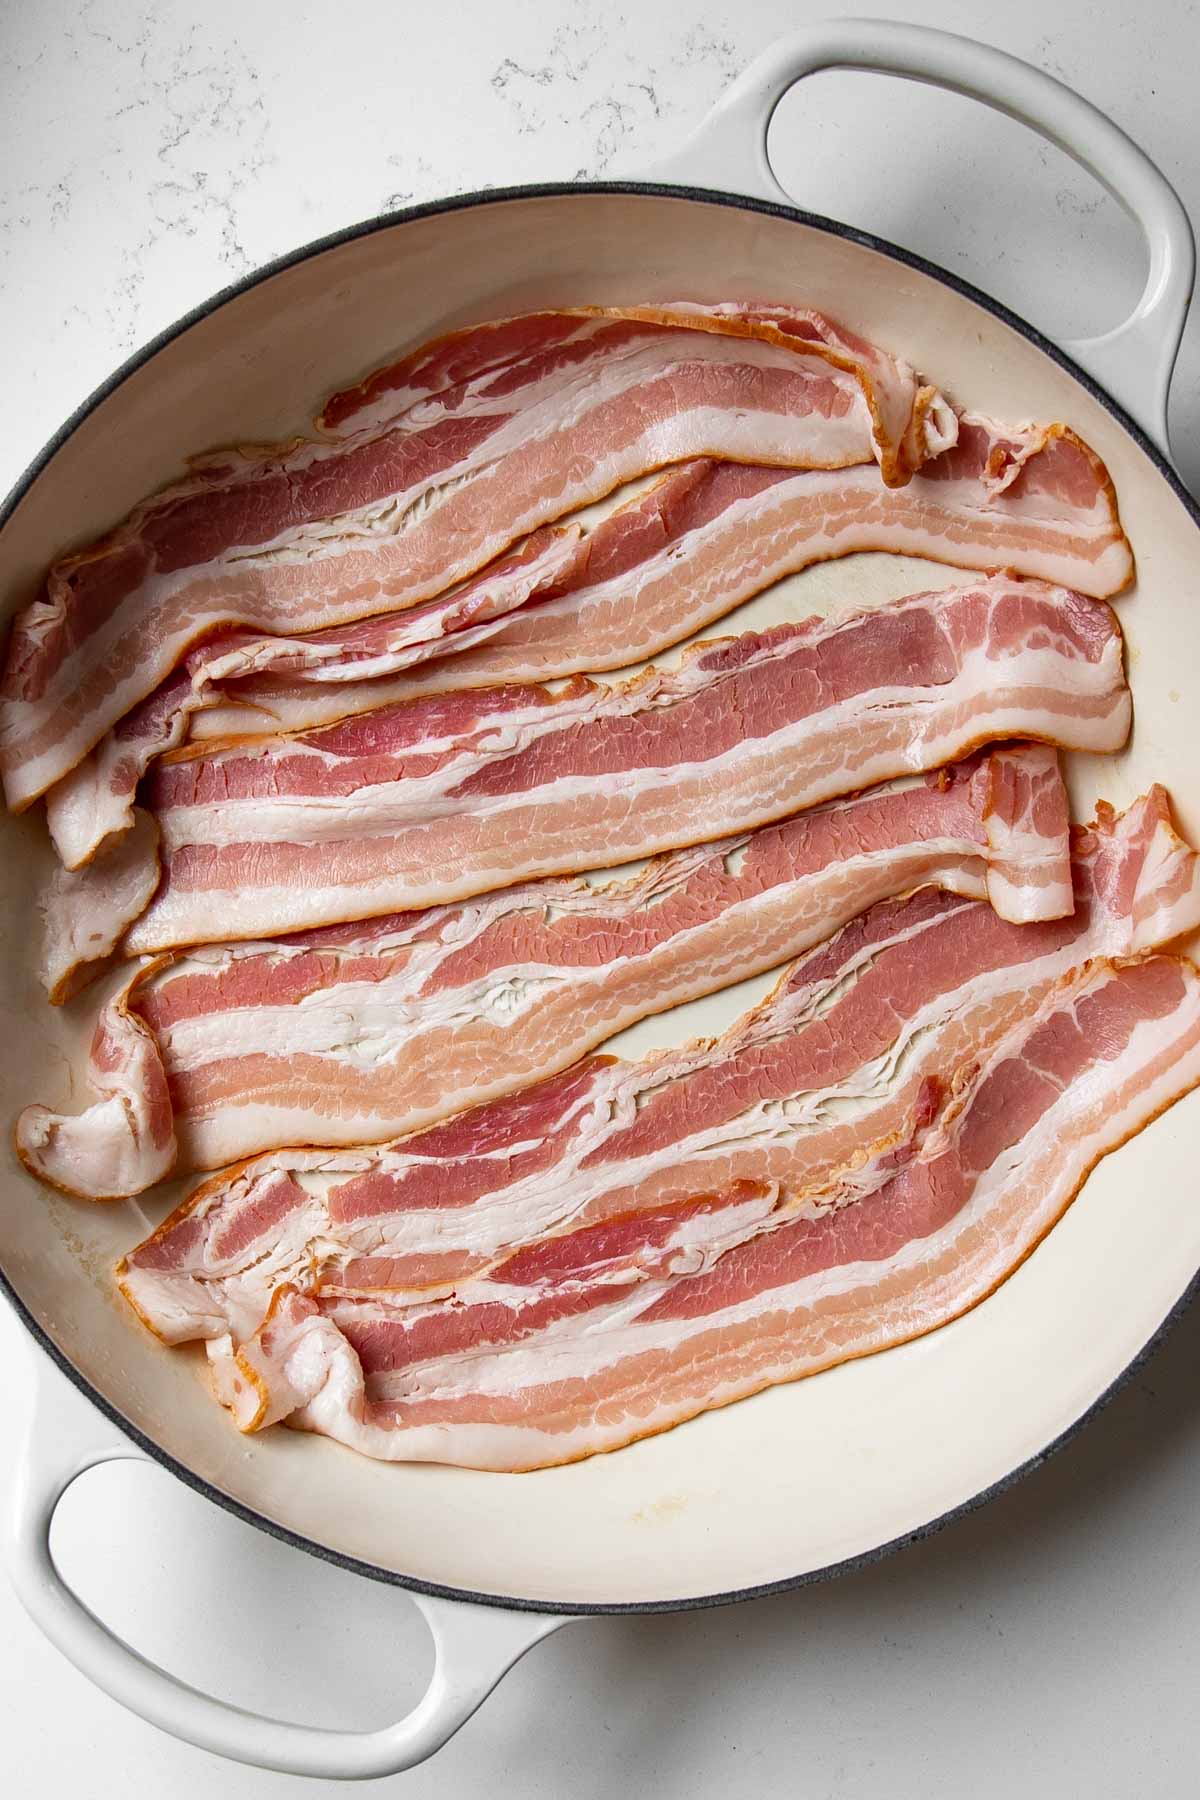 uncooked bacon in a cold skillet.